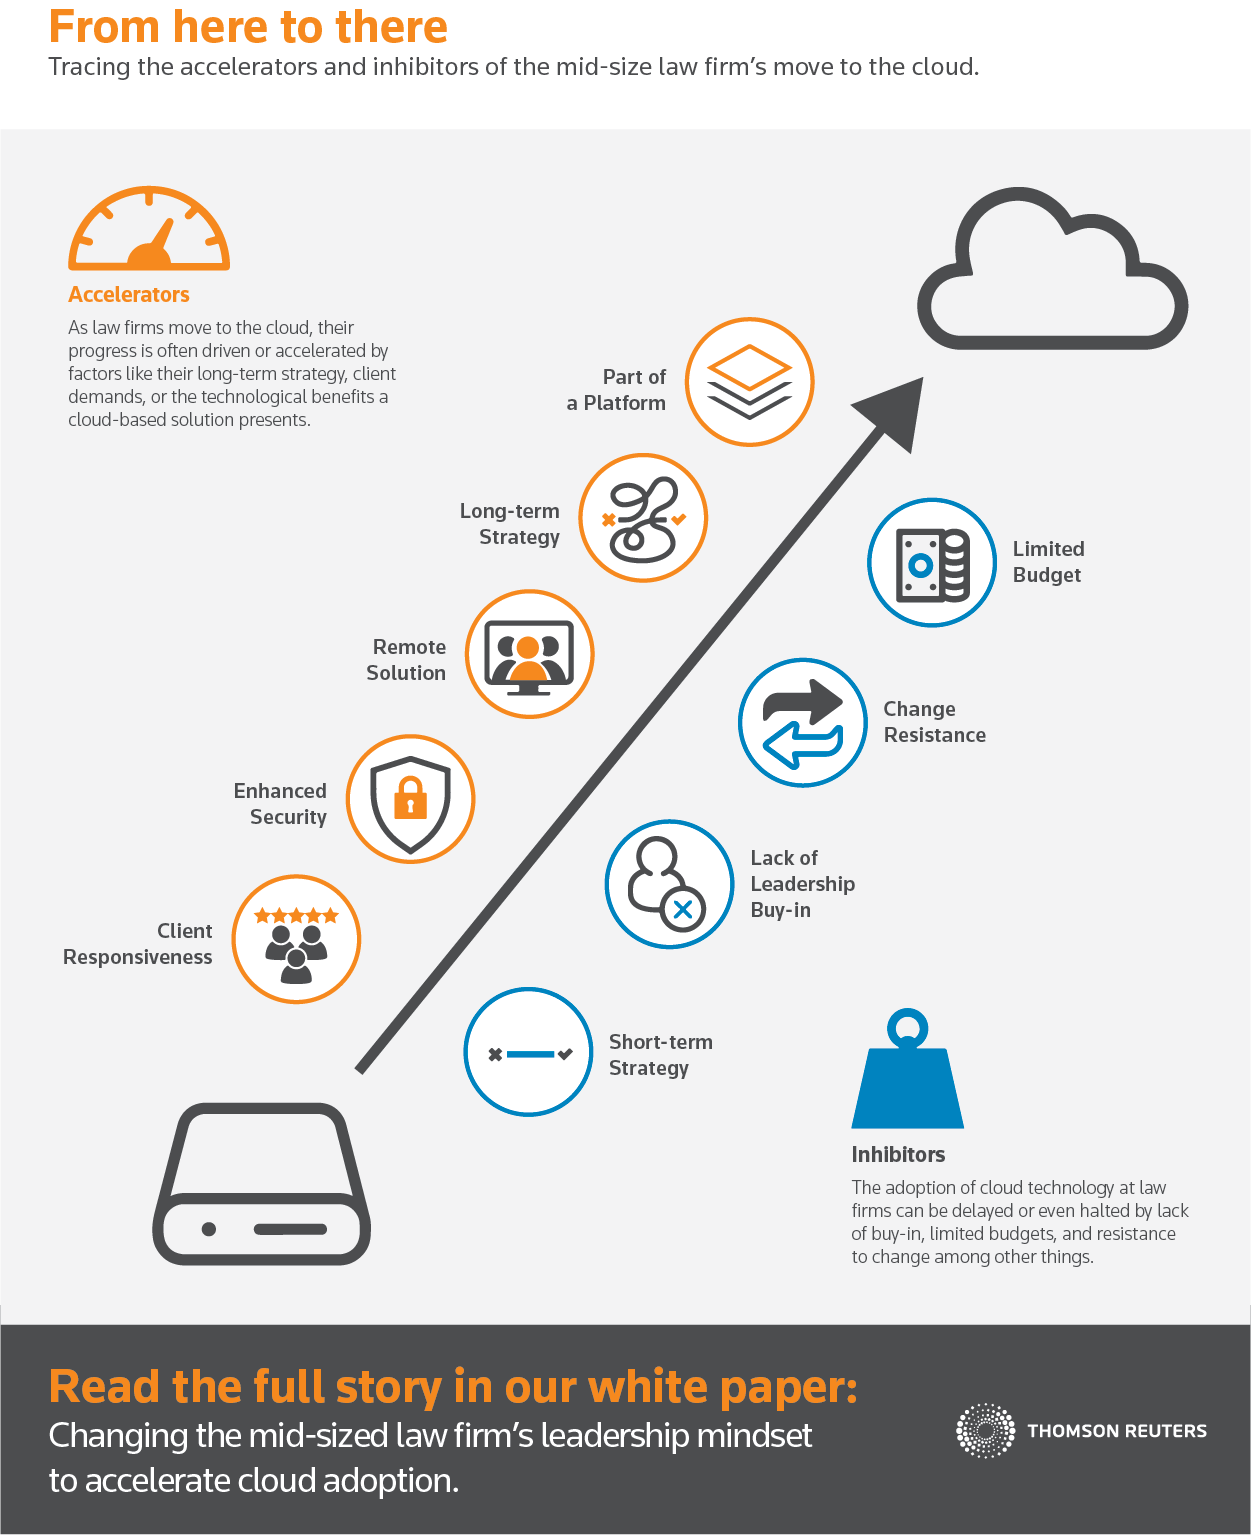 Infographic showing the  accelerators and inhibitors to cloud adoption for mid-size law firms